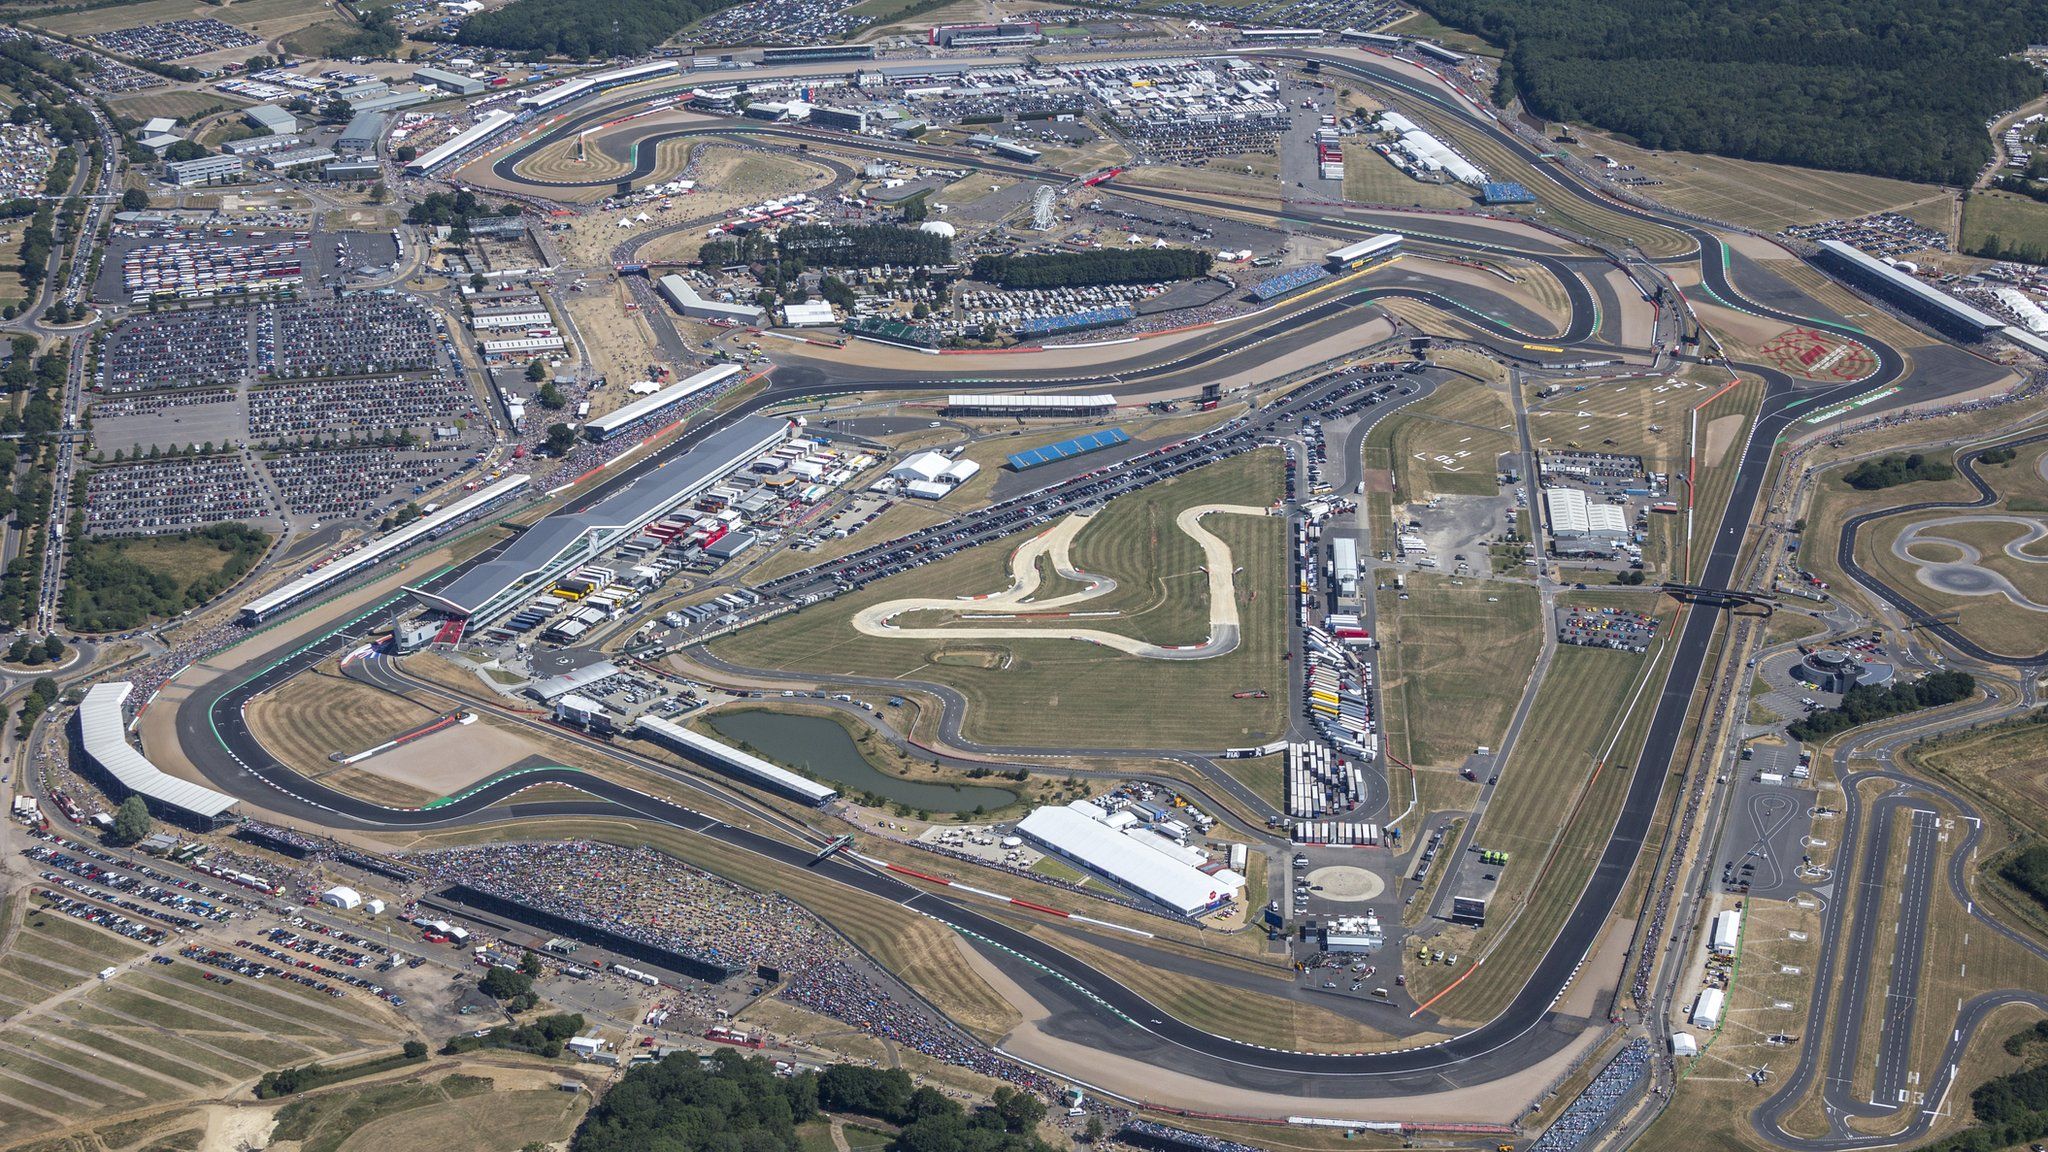 Aerial shot of Silverstone